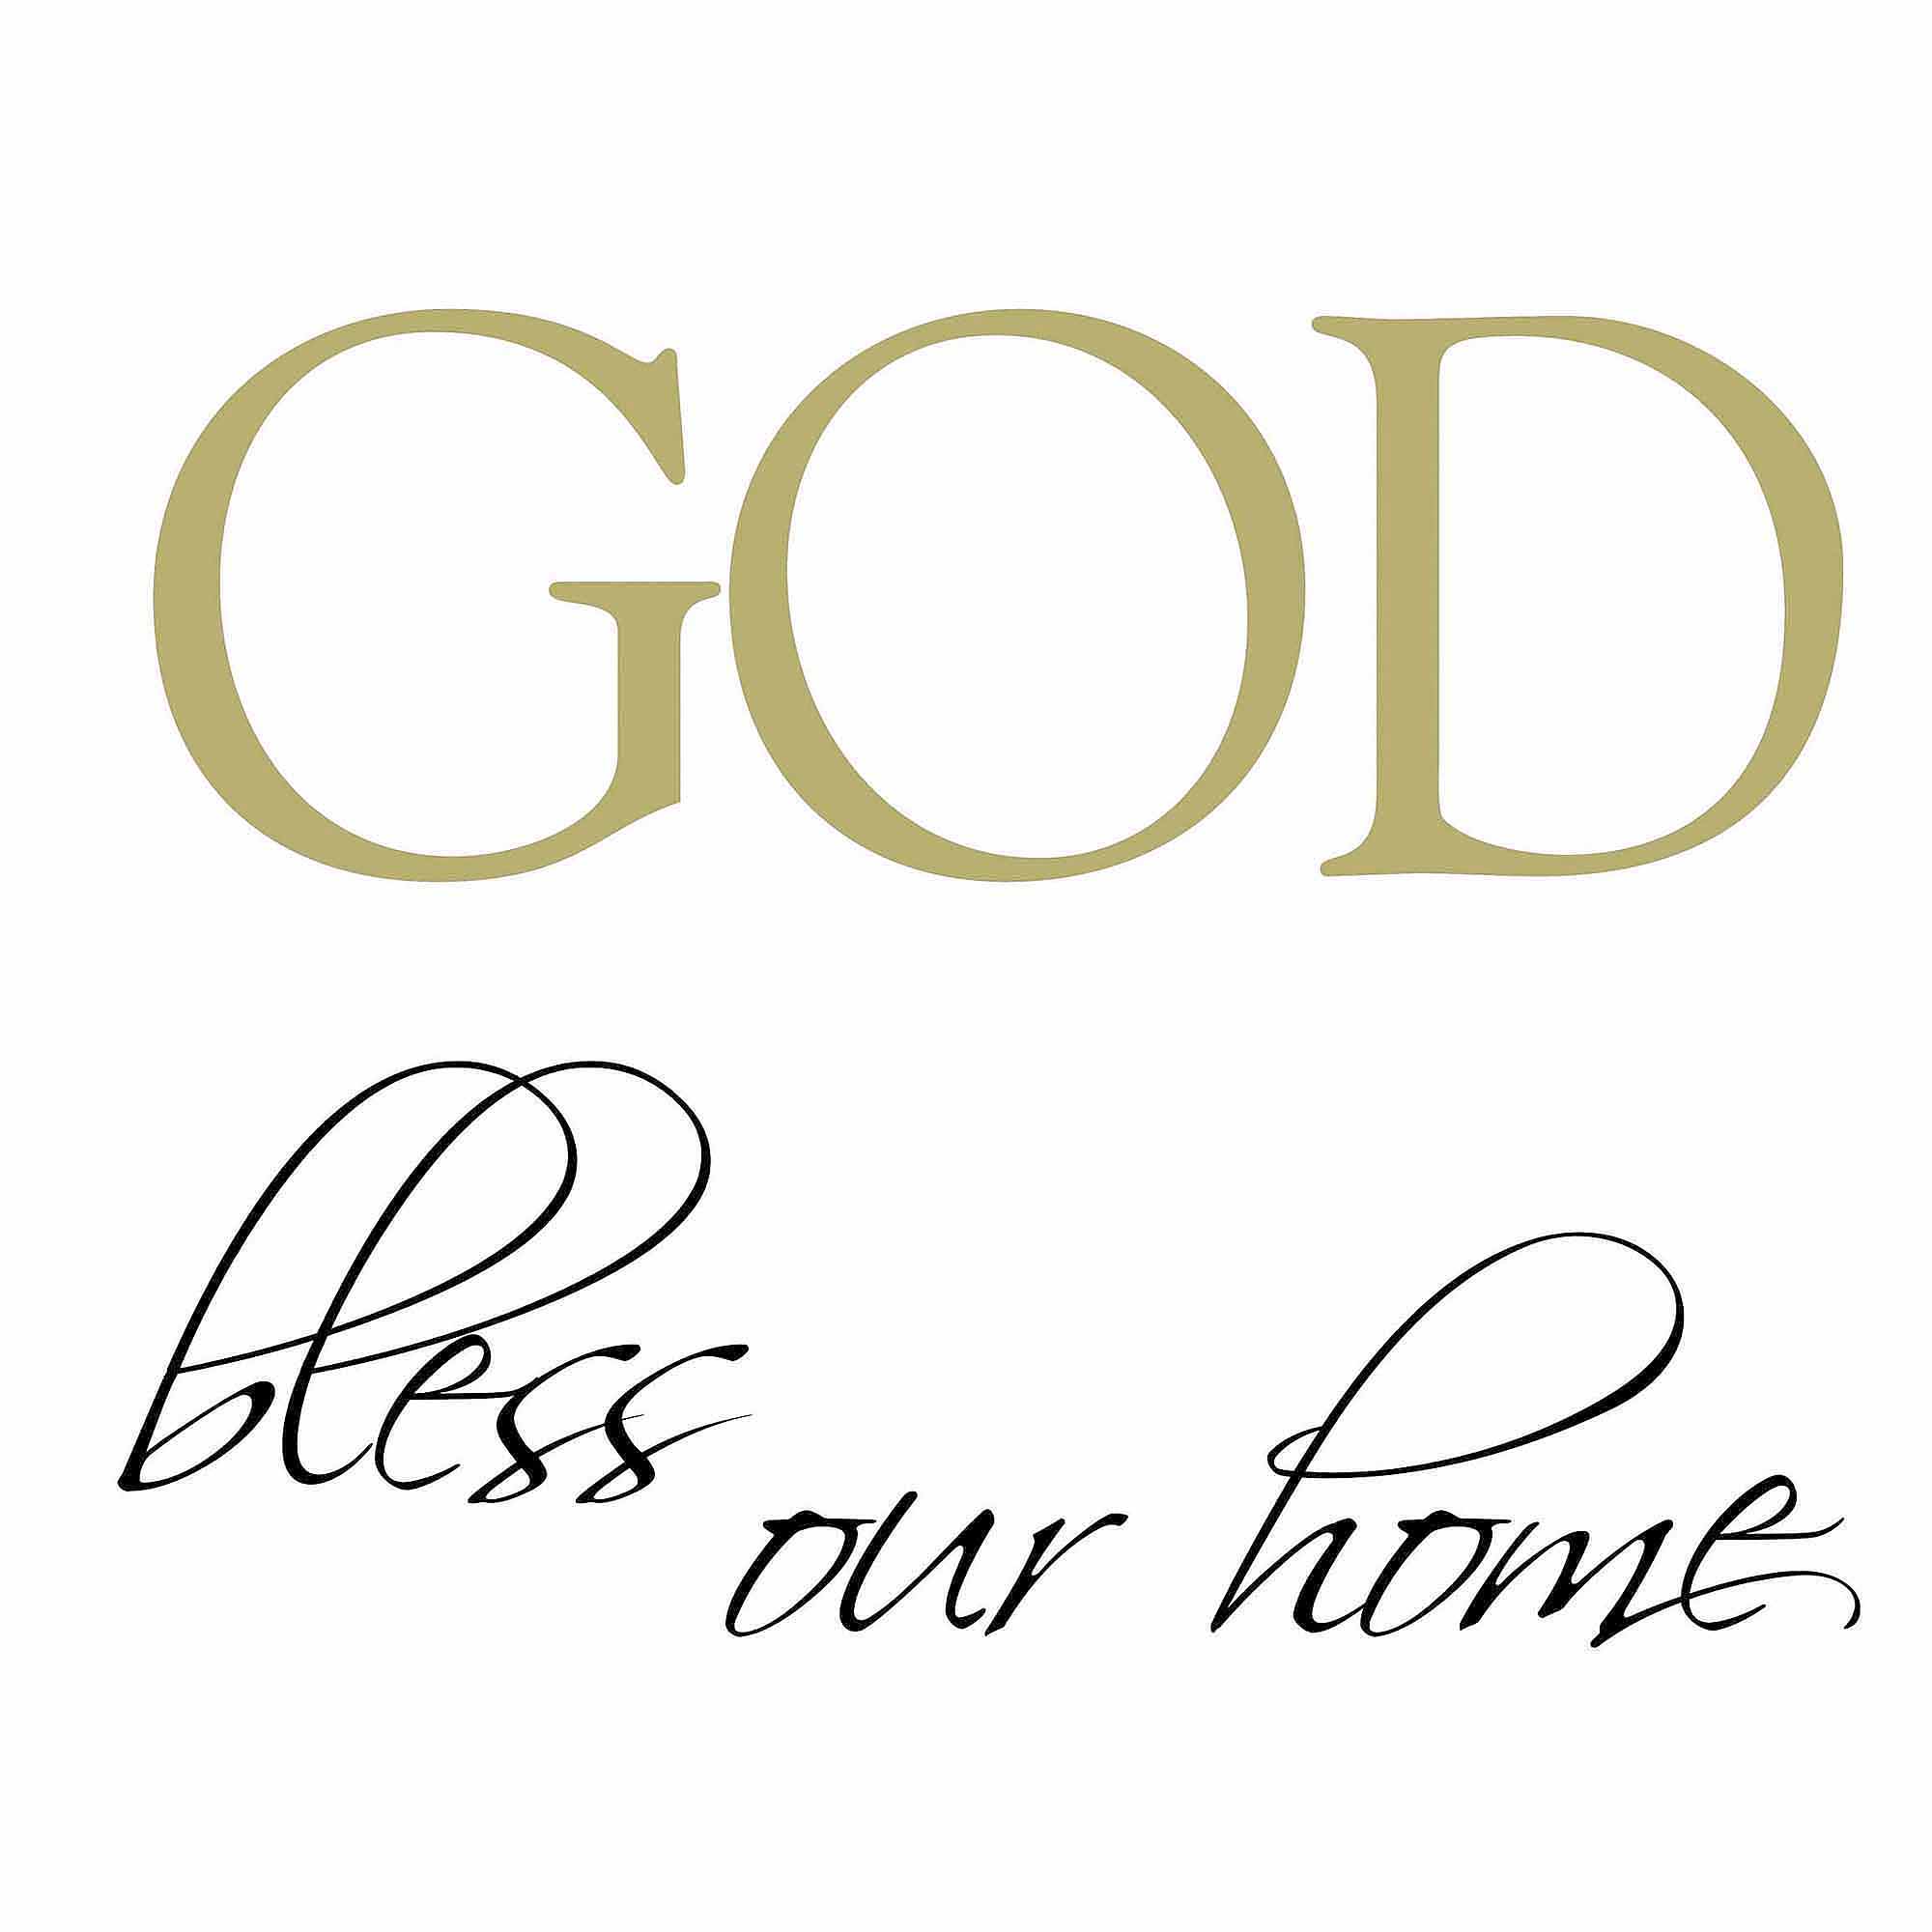 Bless Our Home Quick Quote - image 1 of 2